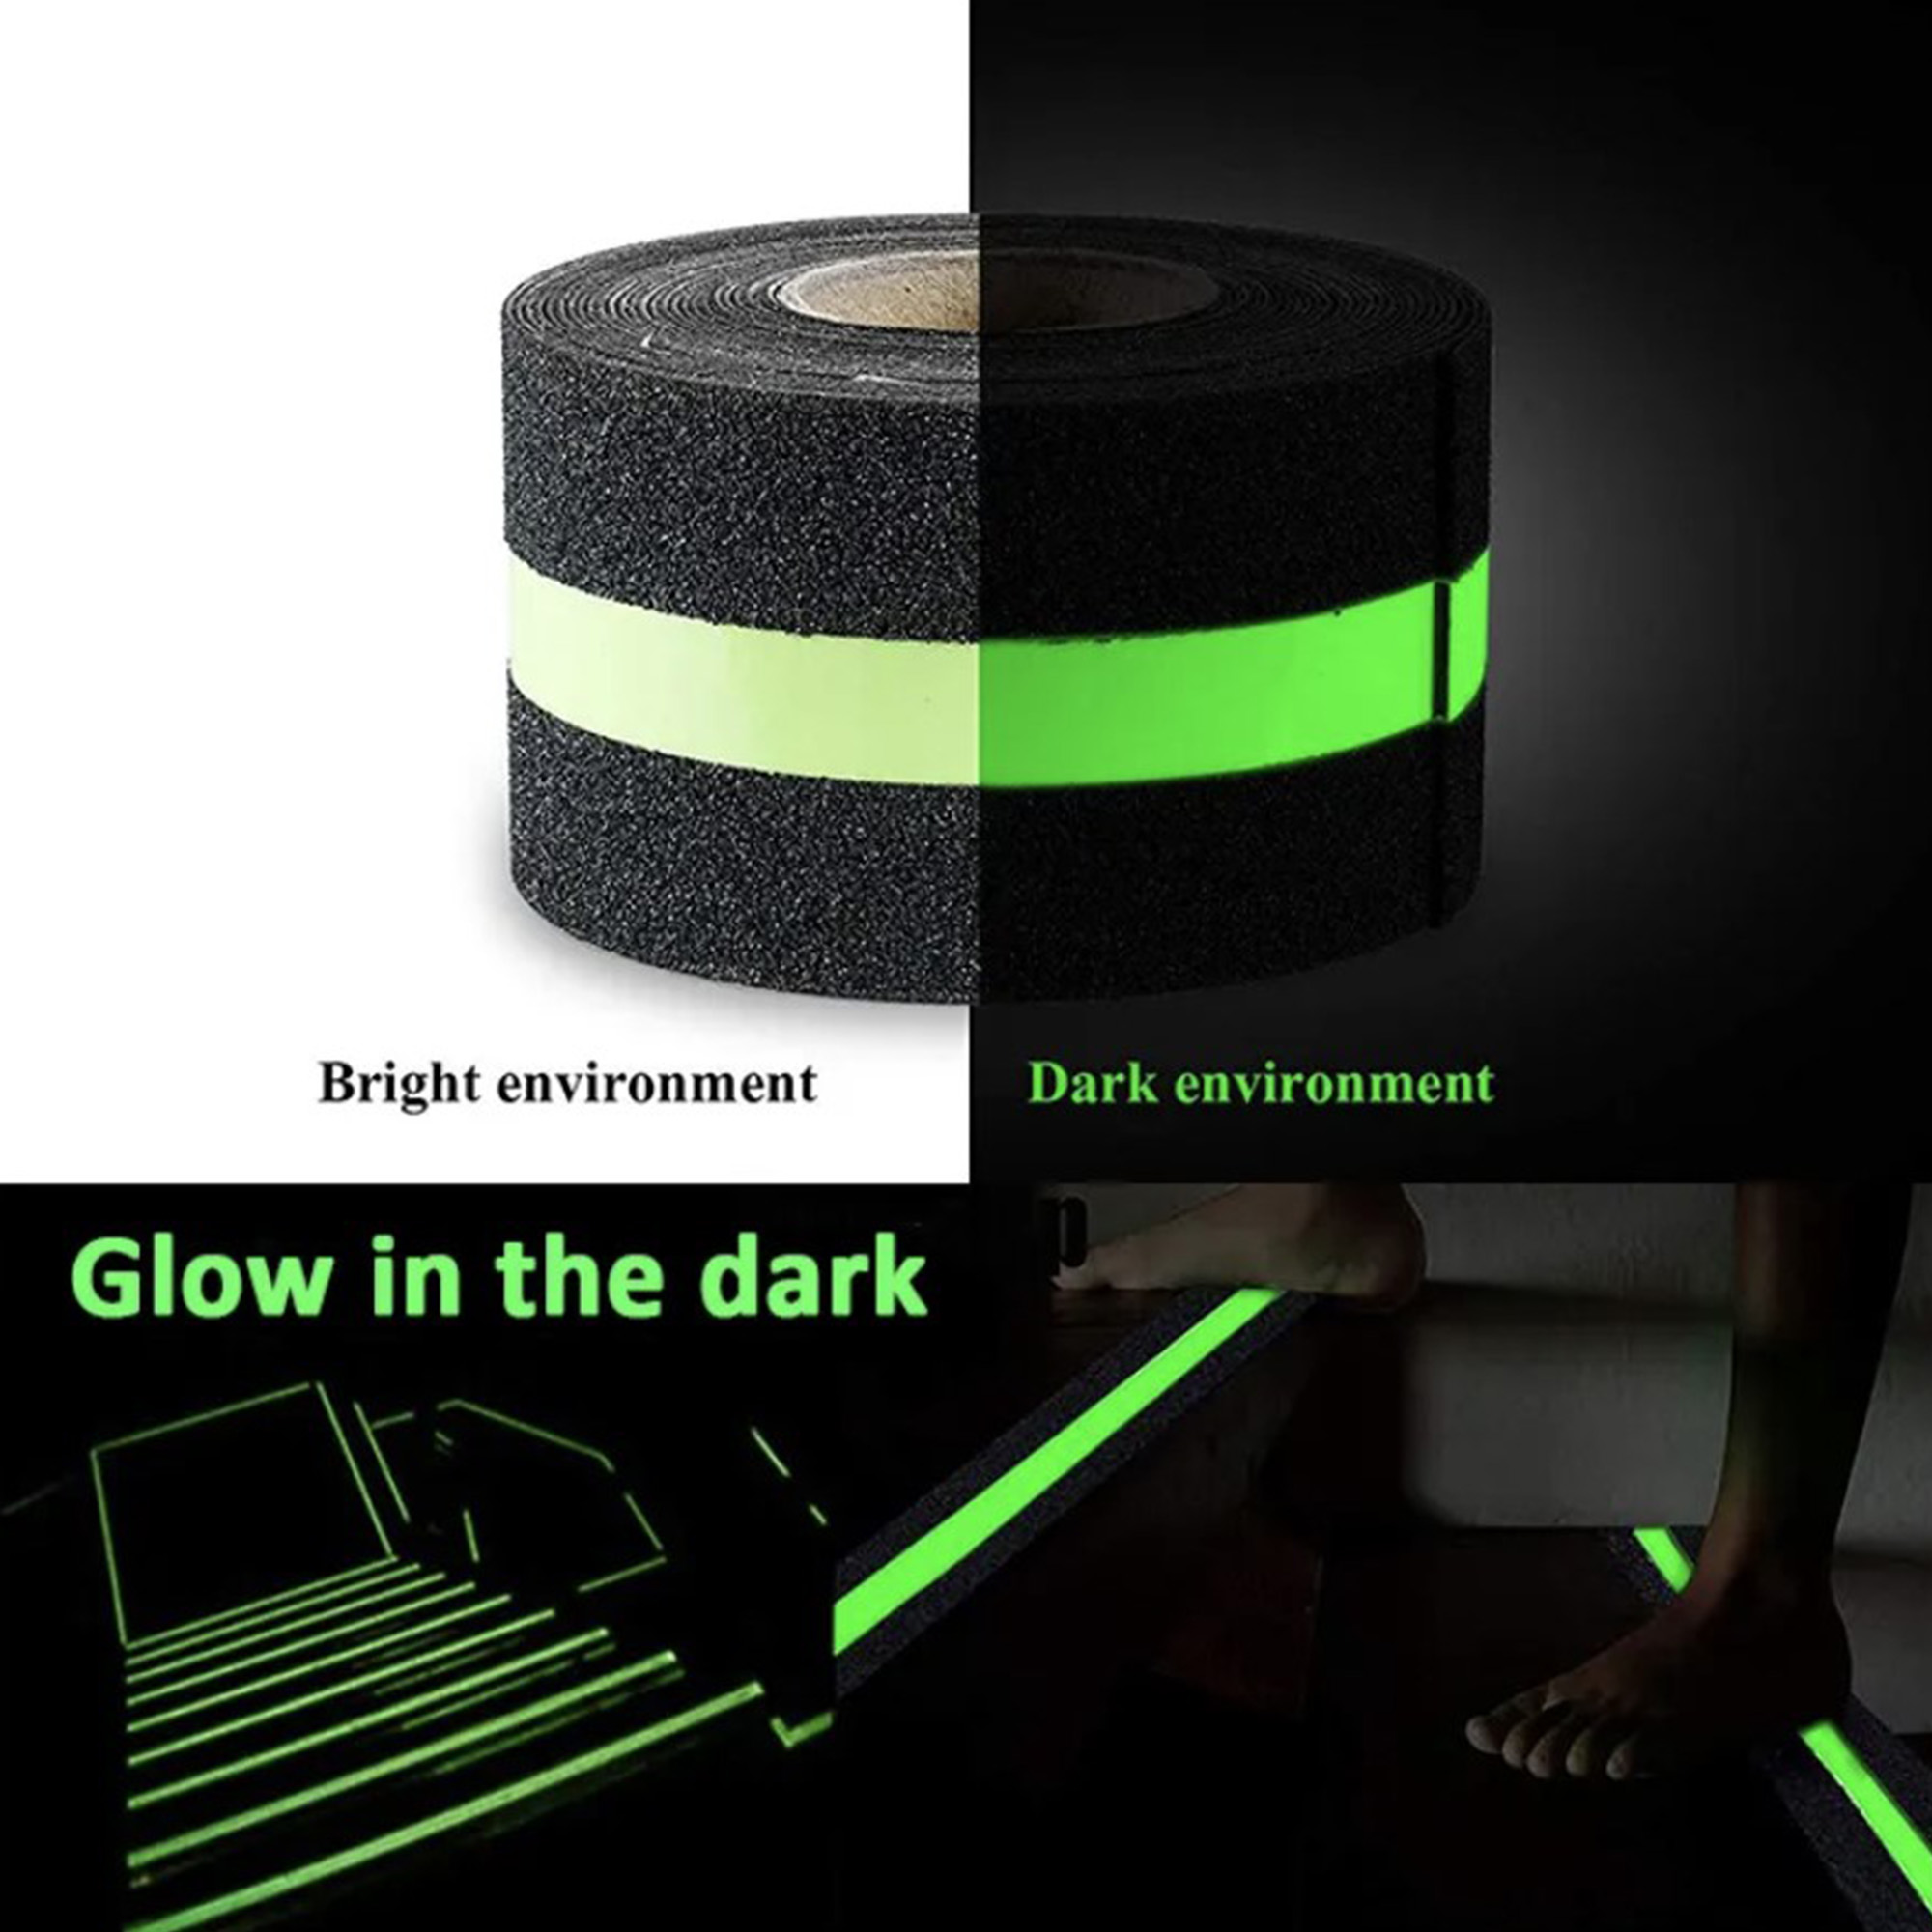 Sussexhome Non-Slip Glow In The Dark Tape - Heavy Duty Grip Tape For Stairs - Waterproof Safety Anti Slip Tape - 2"X35' Roll, Glow